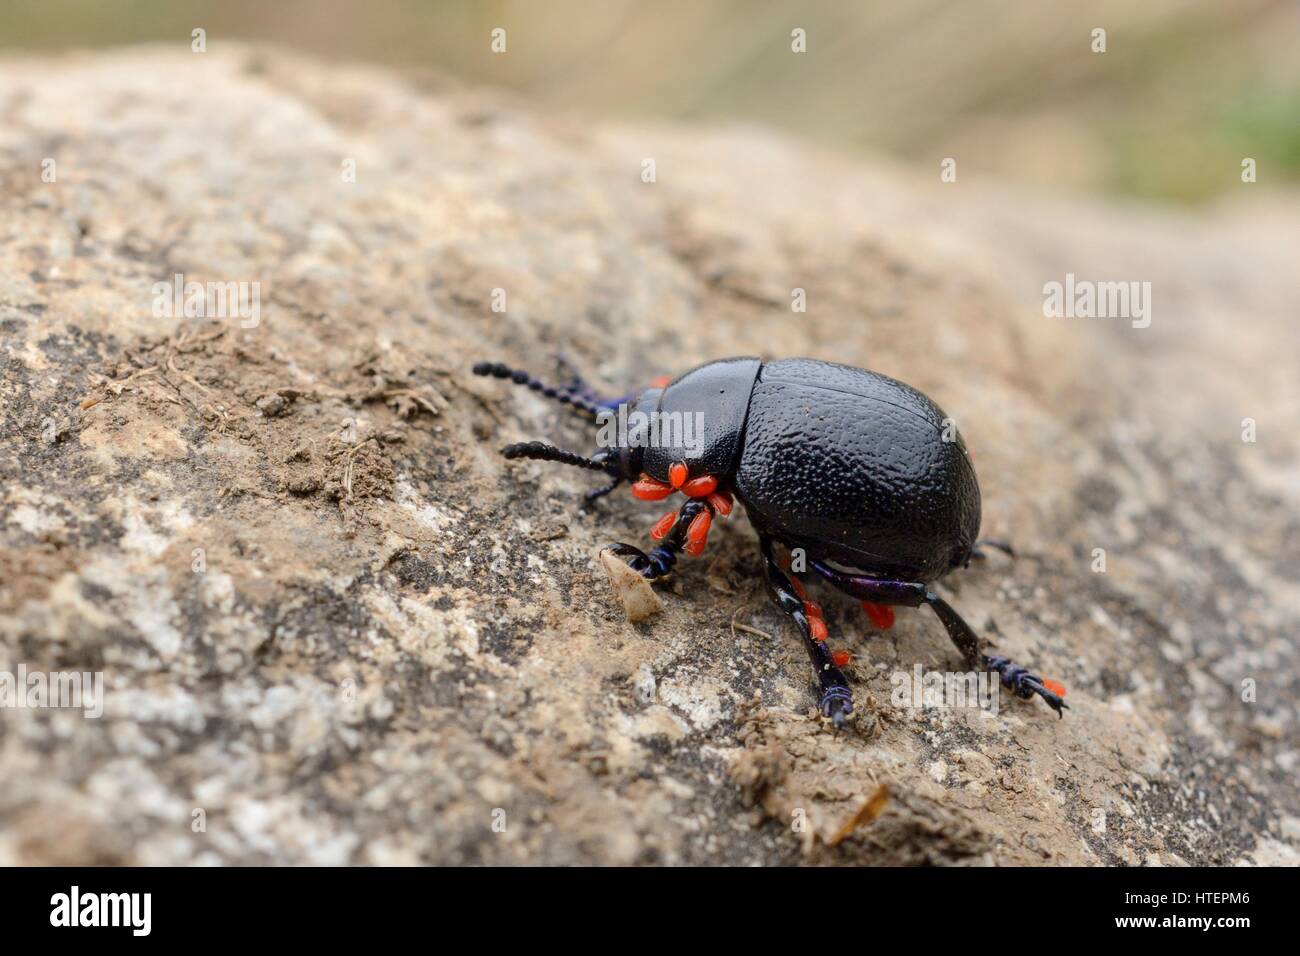 Bloody-nosed beetle (Timarcha cyanescens) with several phoretic mites attached walking over a boulder, Asturias, Spain, August. Stock Photo